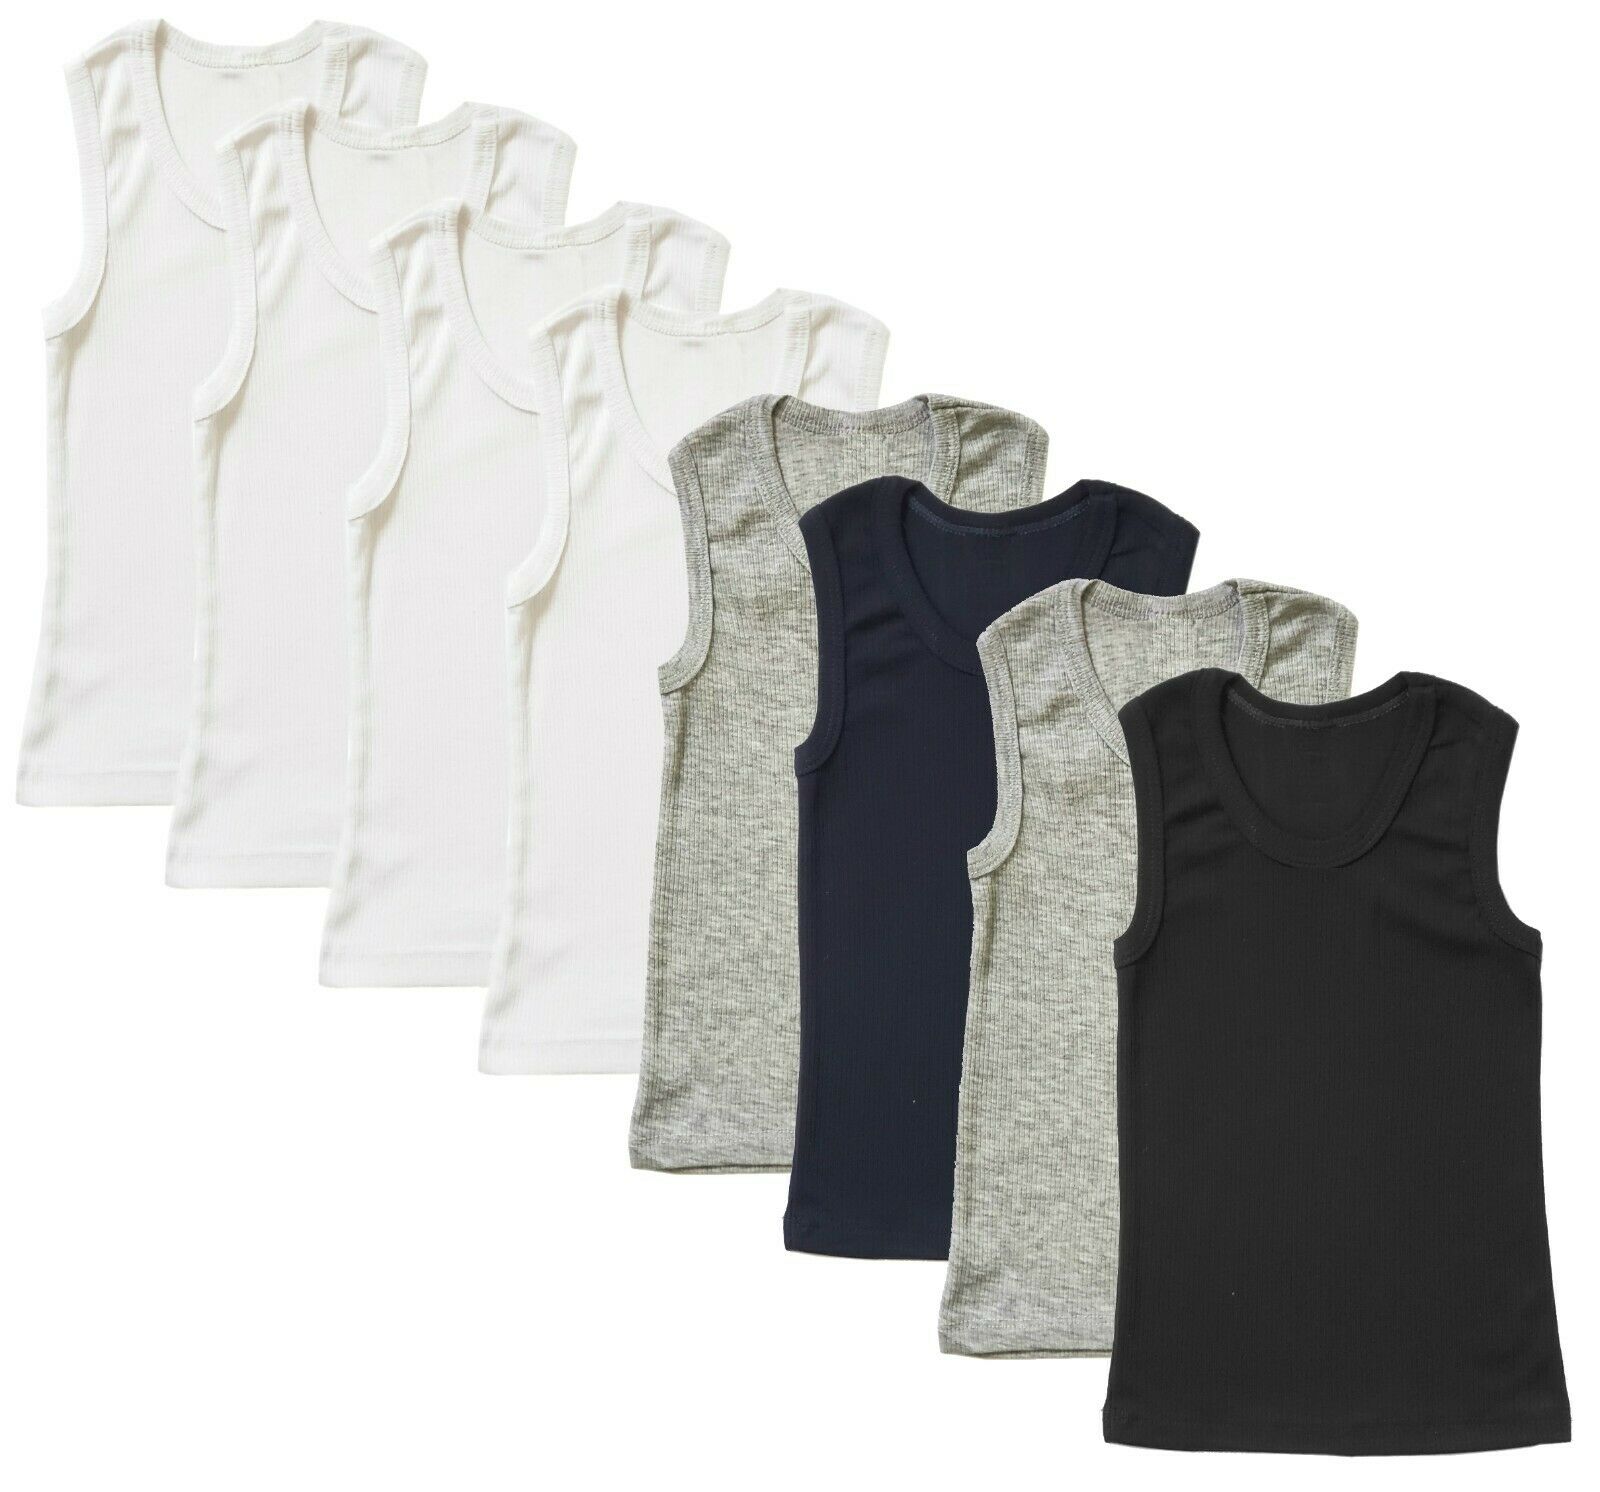 Tank Top Undershirt 4-pack Ribbed Vest Muscle Sleeveless Boys Kids Toddler Baby